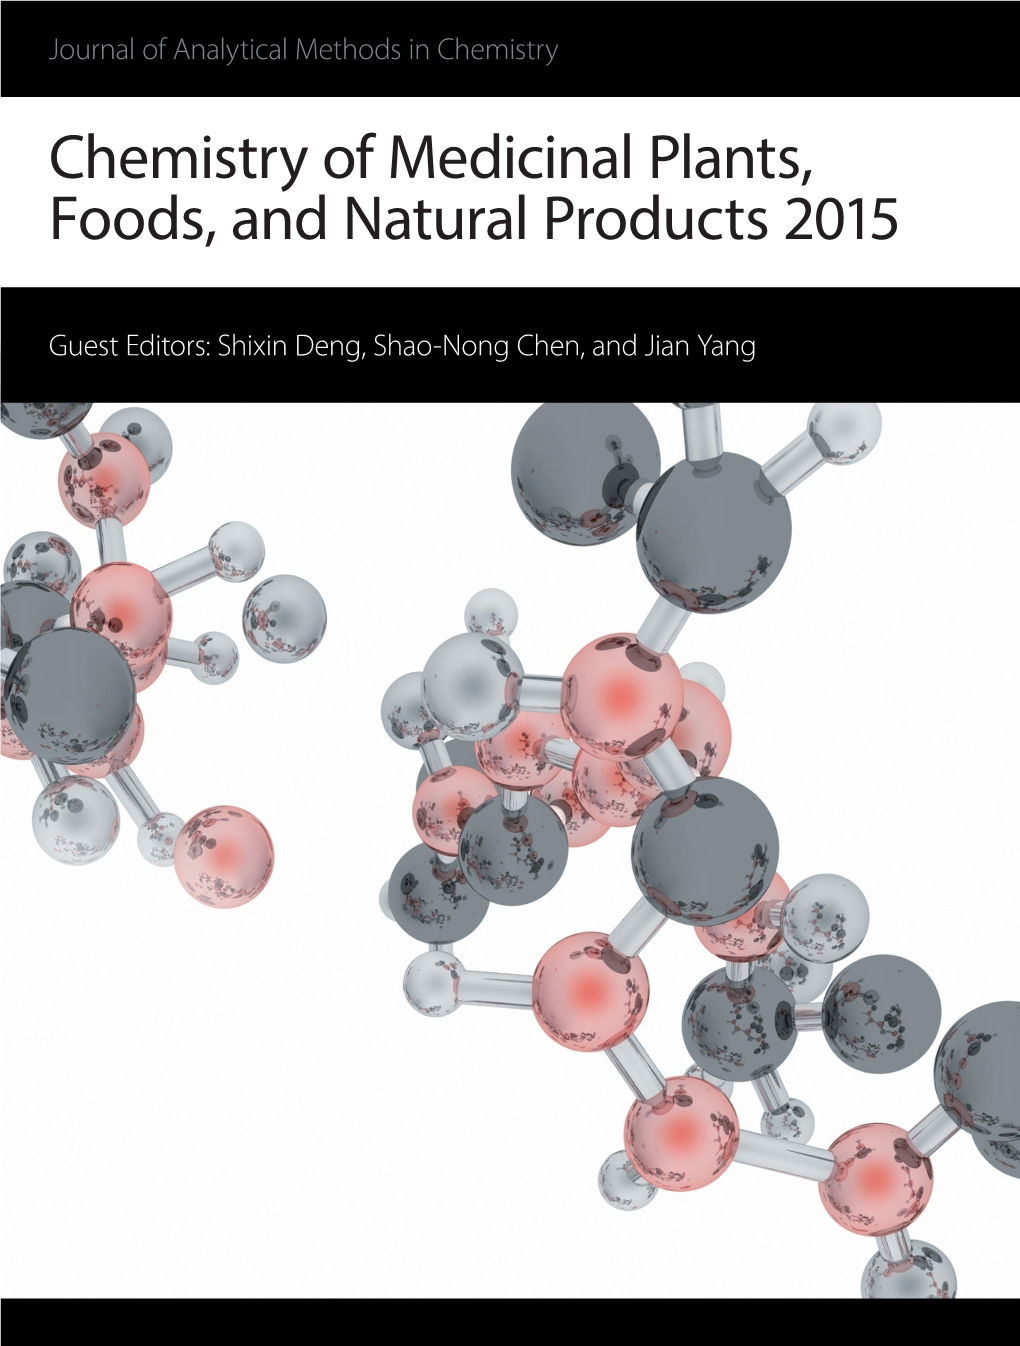 Chemistry of Medicinal Plants, Foods, and Natural Products 2015